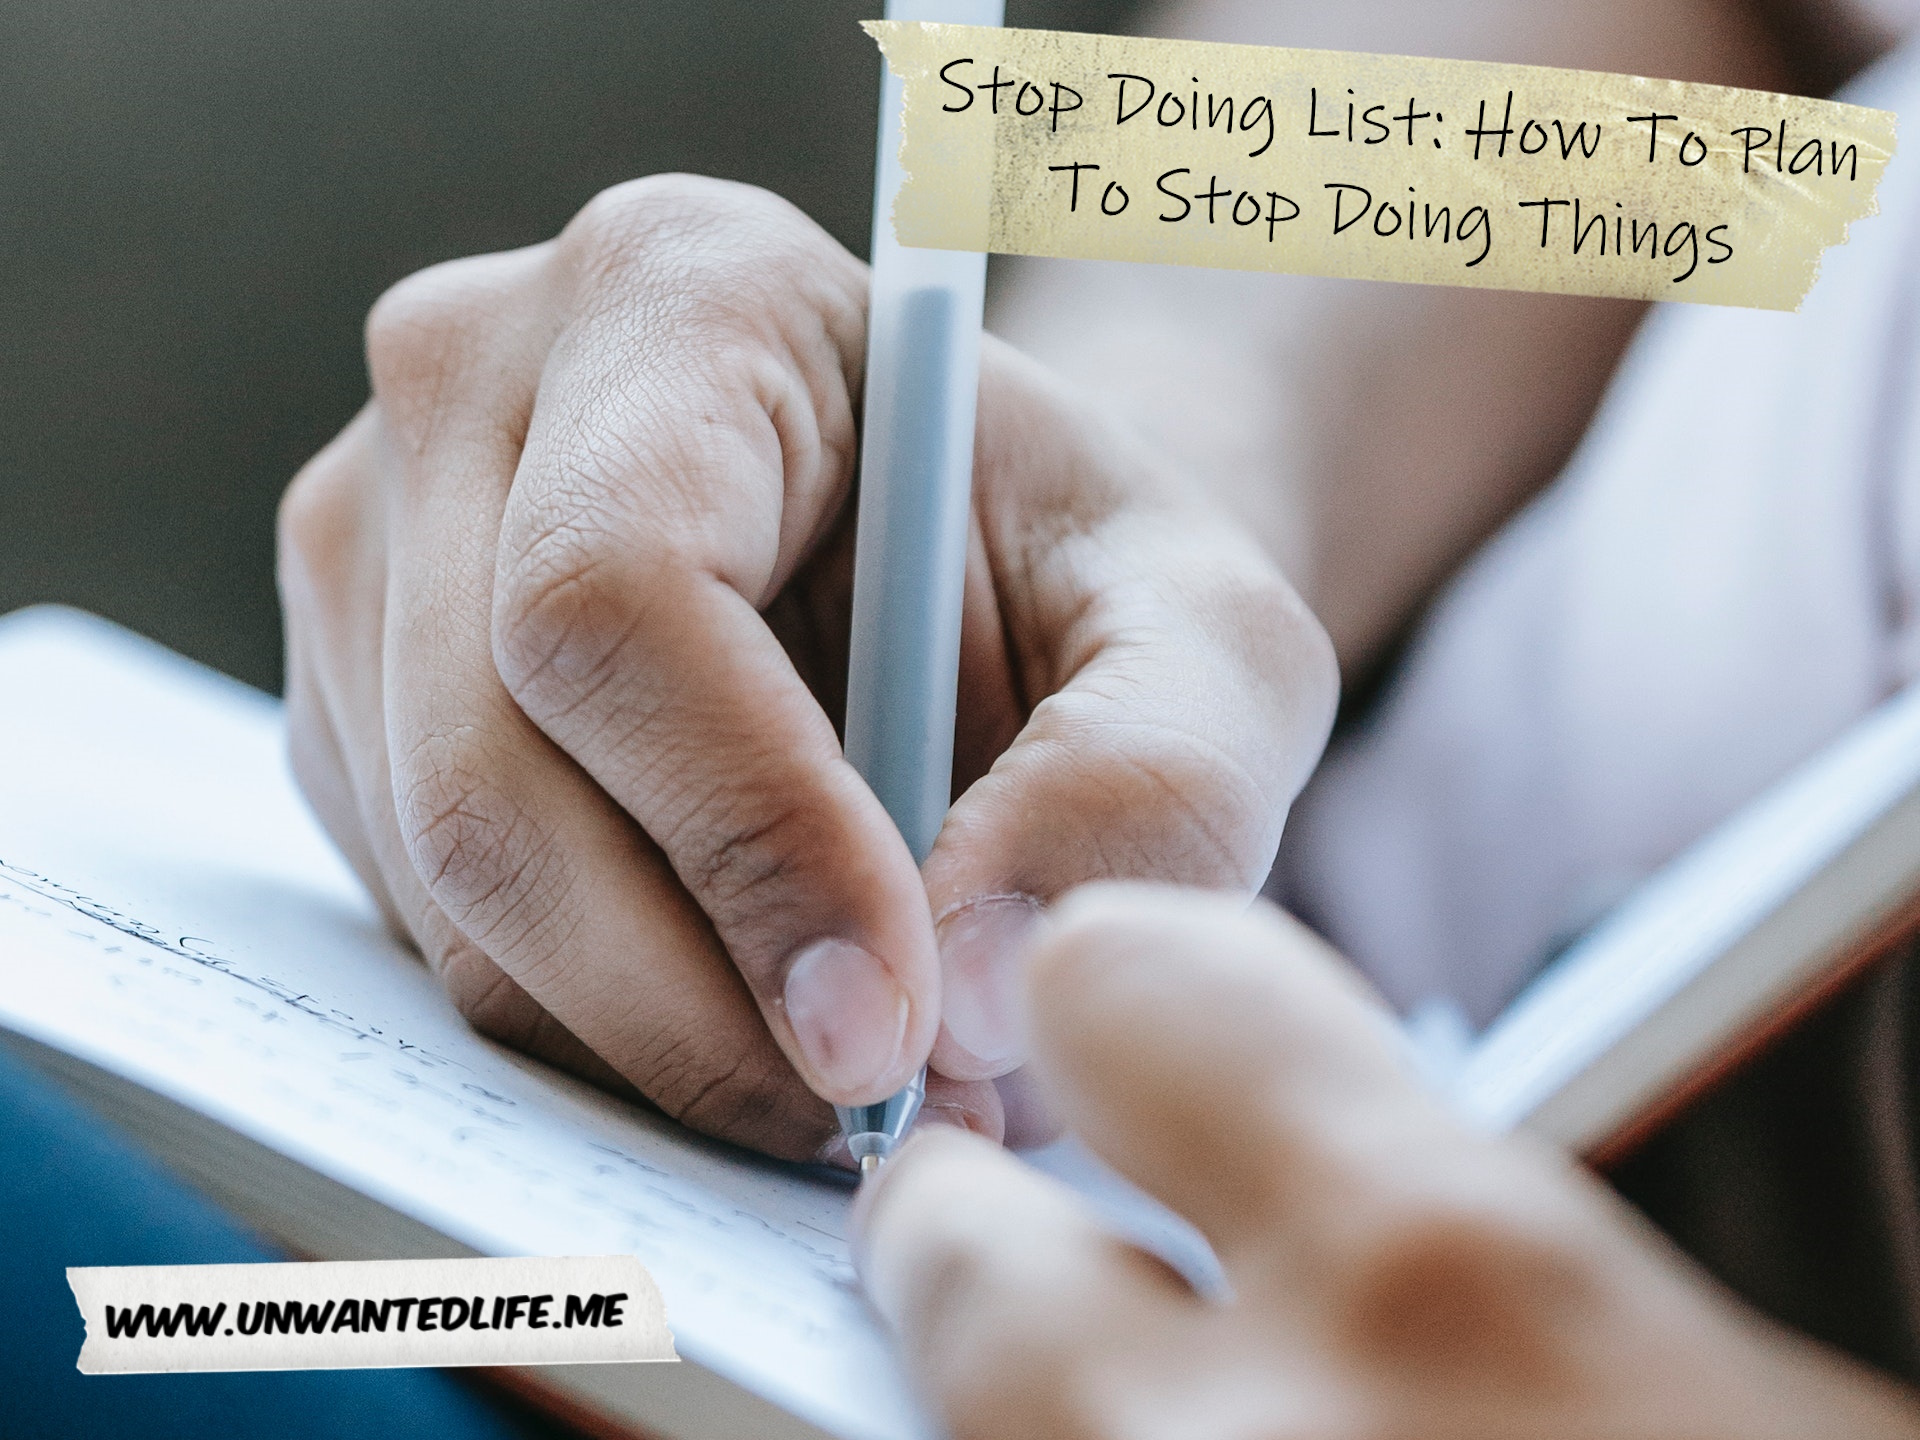 A photo of light brown hands writing in a journal to represent the topic of the article - Stop Doing List: How To Plan To Stop Doing Things